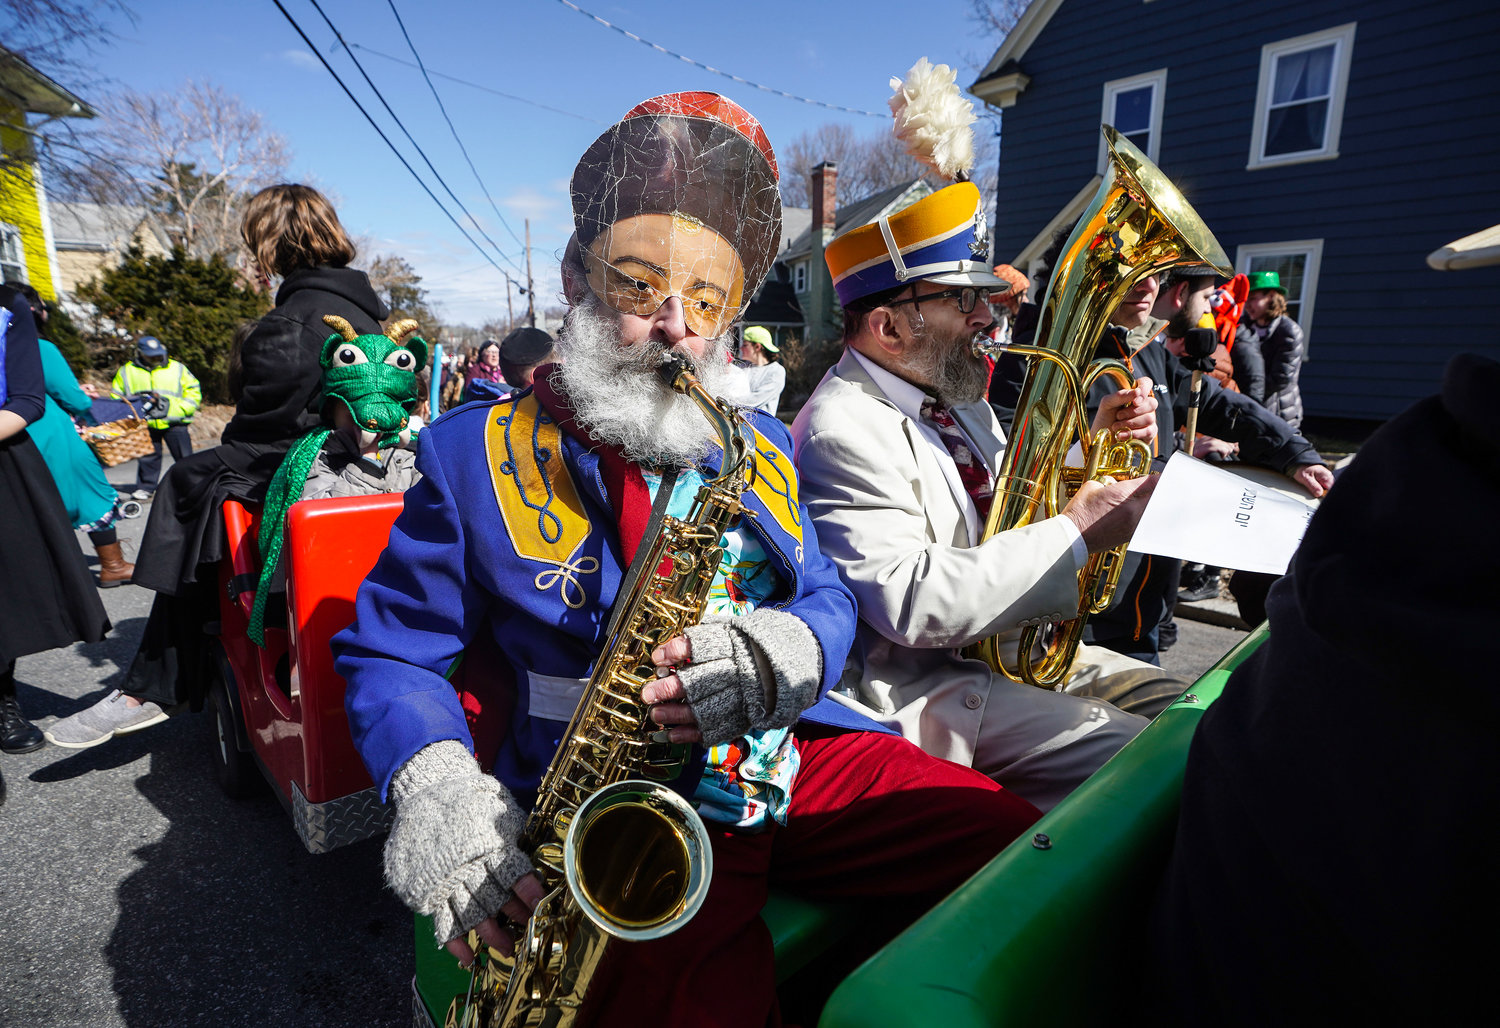 Costumed participants sing, dance and celebrate as they march down Morris Avenue in the Purim Parade.